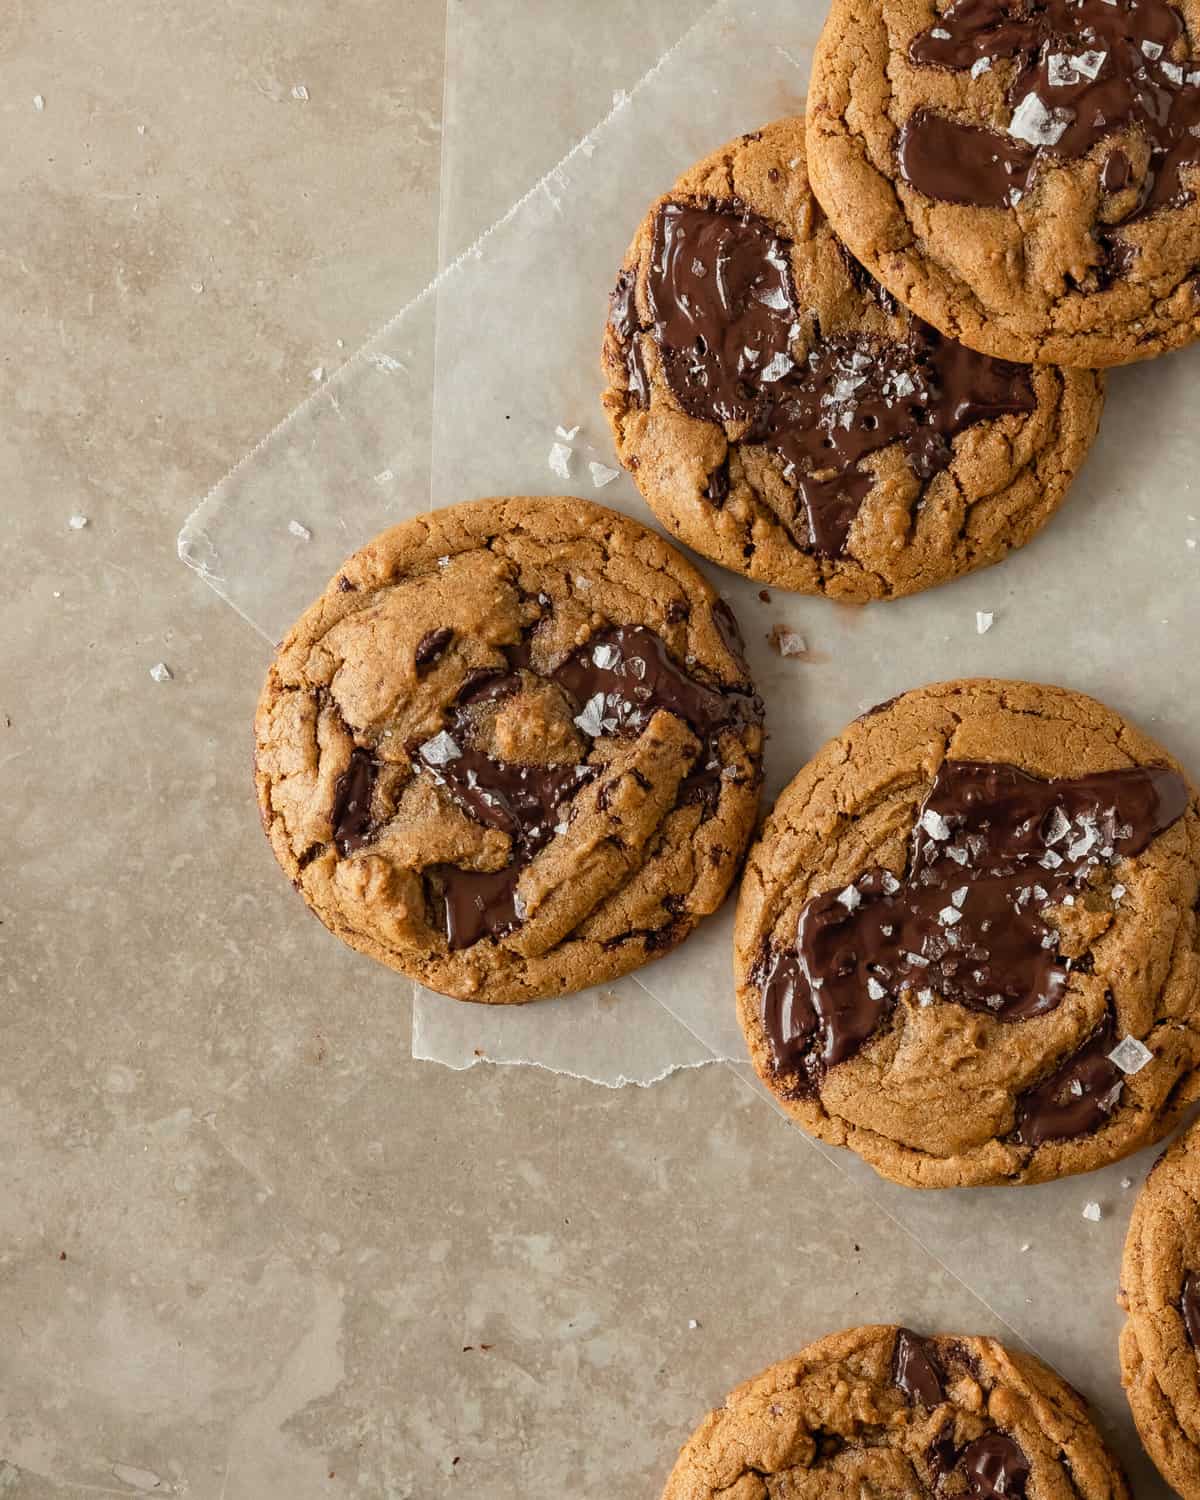 https://olivesnthyme.com/wp-content/uploads/2022/10/Coffee-Cookies-15-scaled.jpg